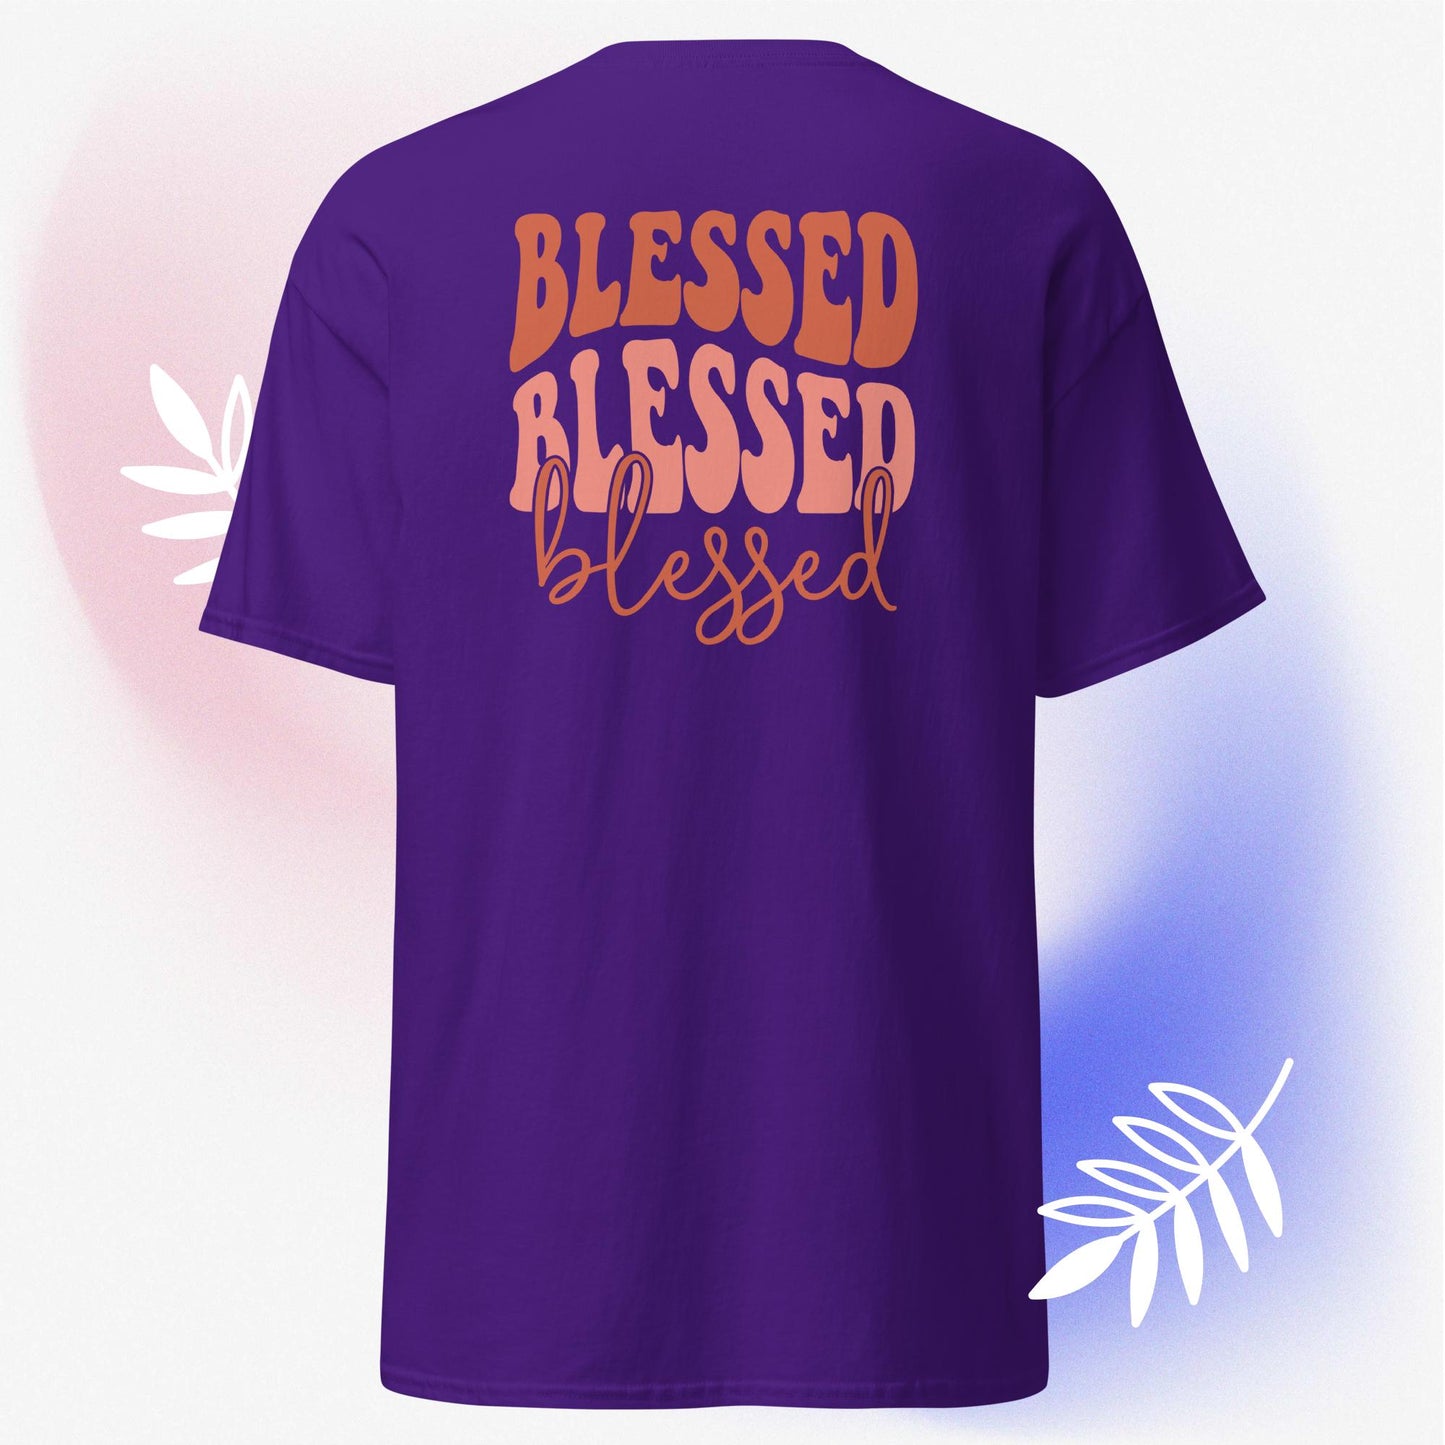 Blessed classic tee